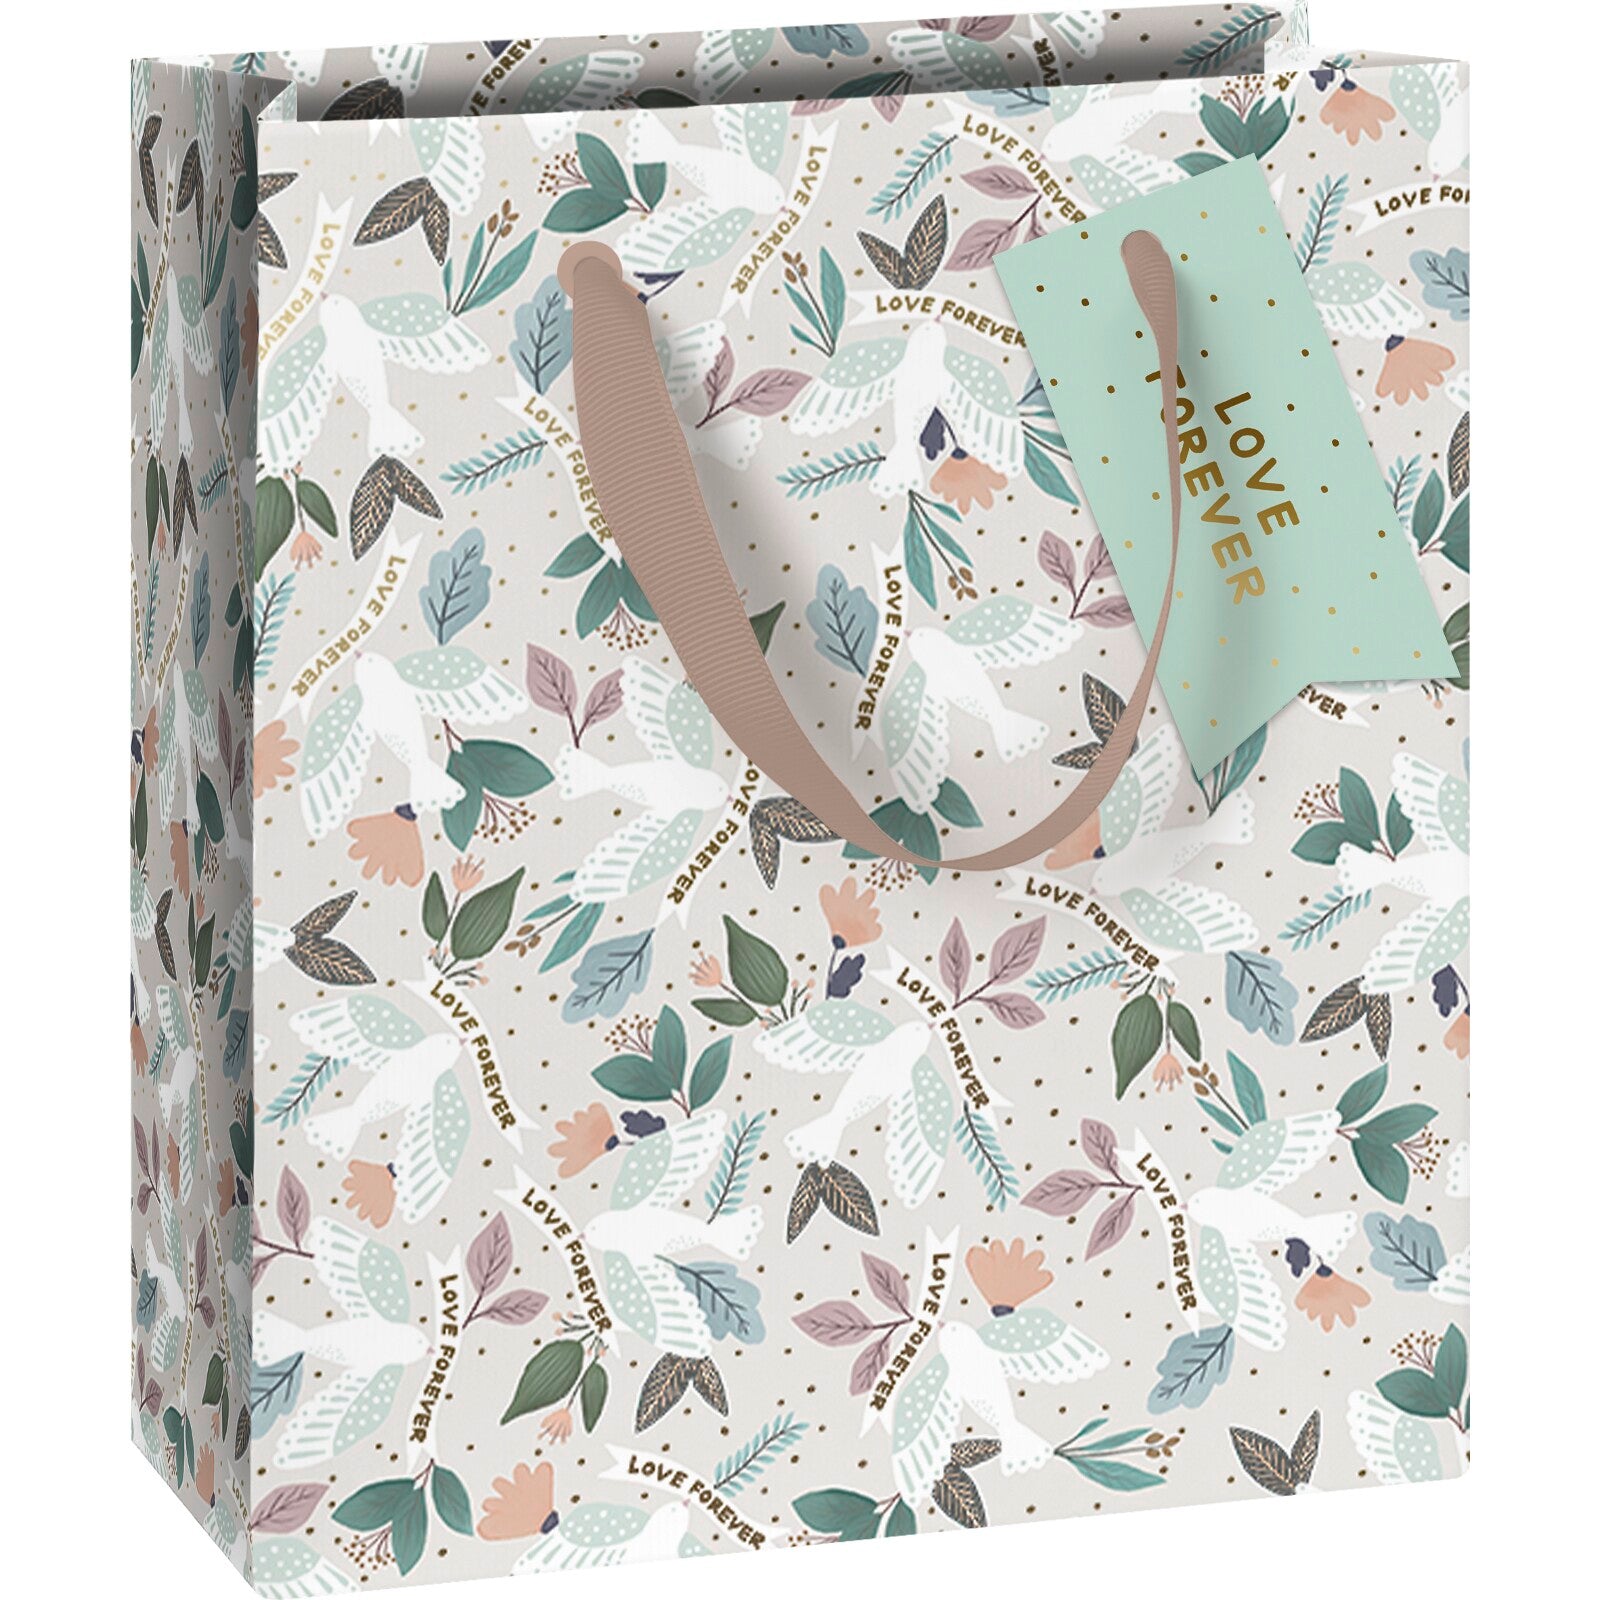 Duva Small Gift Bag from Penny Black